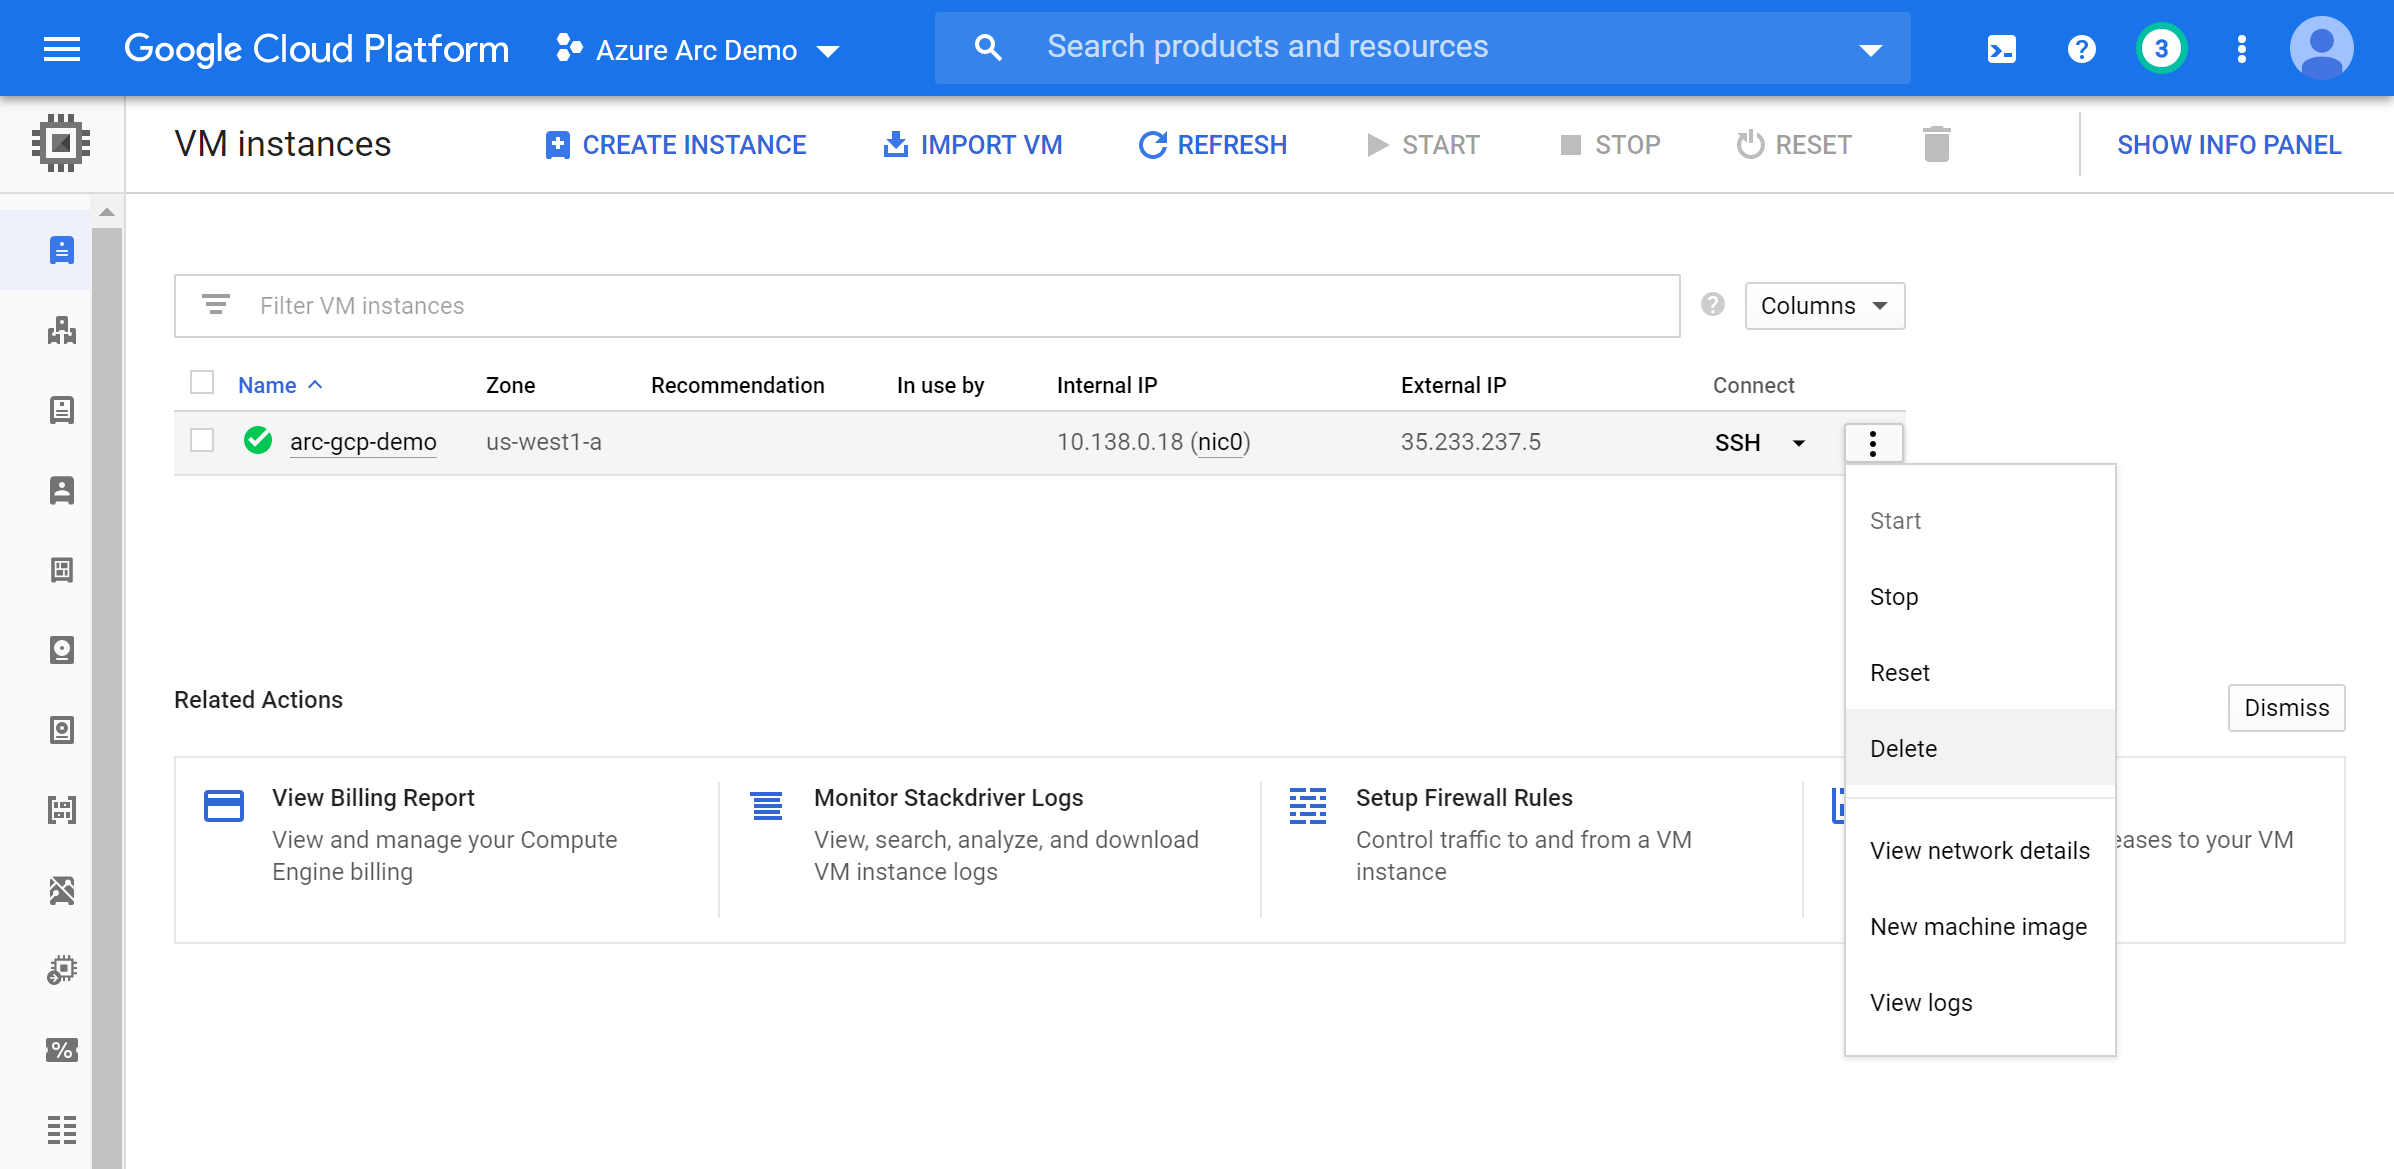 A screenshot showing how to delete a virtual machine from the GCP console.